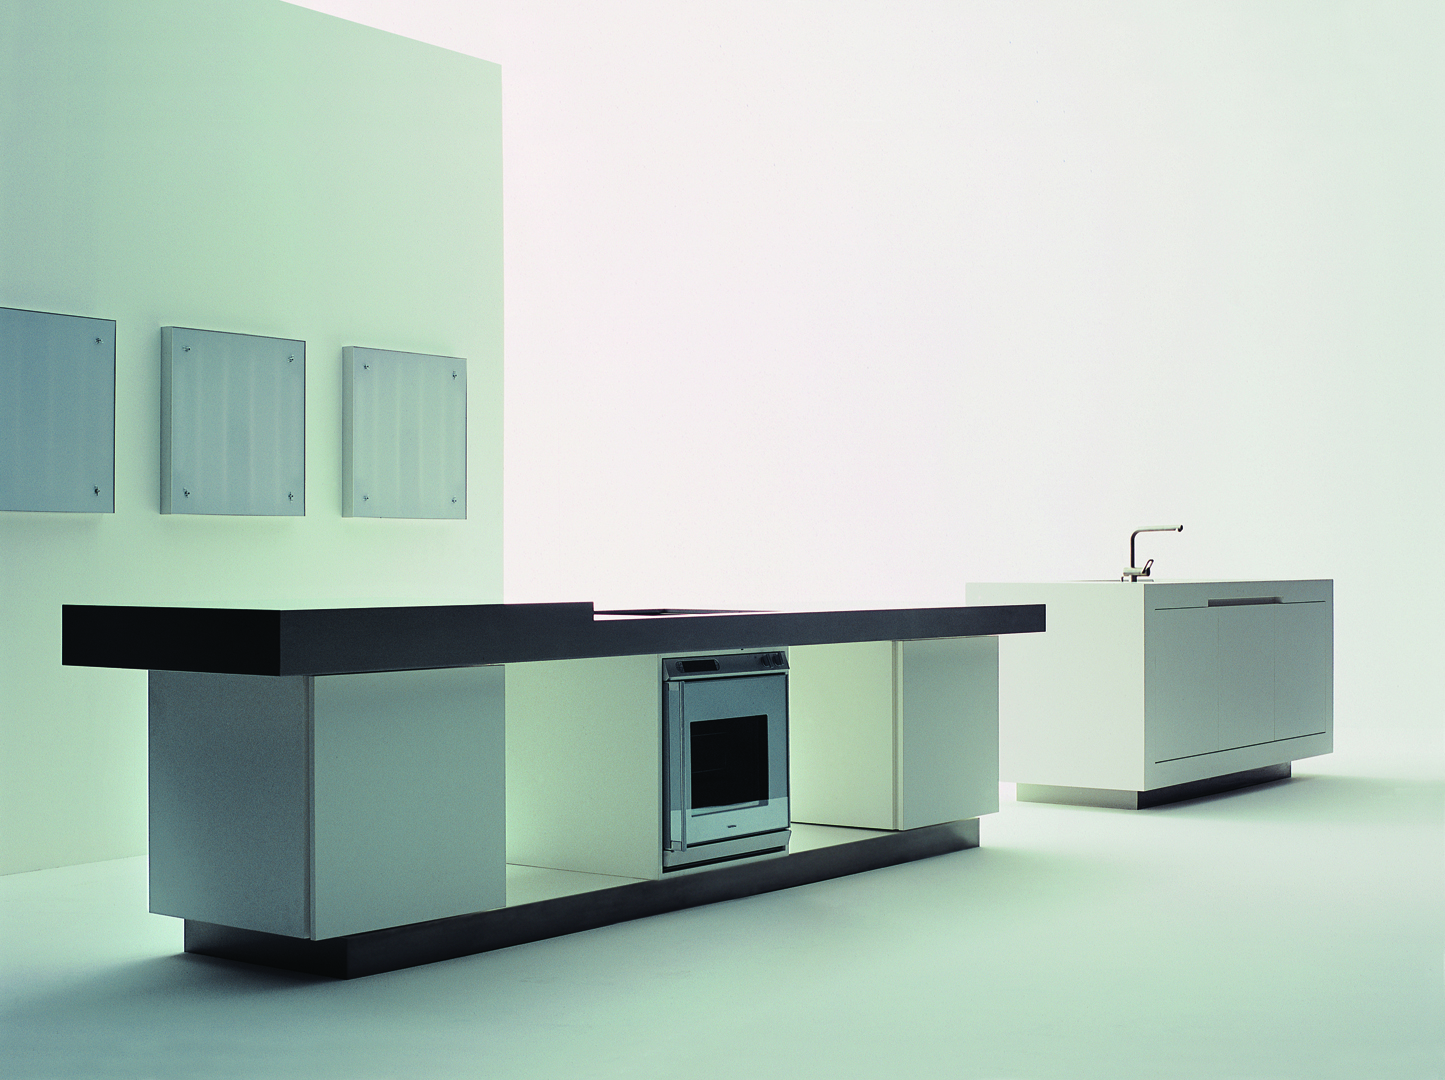 Strato_design_Non-Plus-Ultra_bespoke-kitchen-project-in-Milano_Stratocolor-white_glass_mat-stainless-steel_01